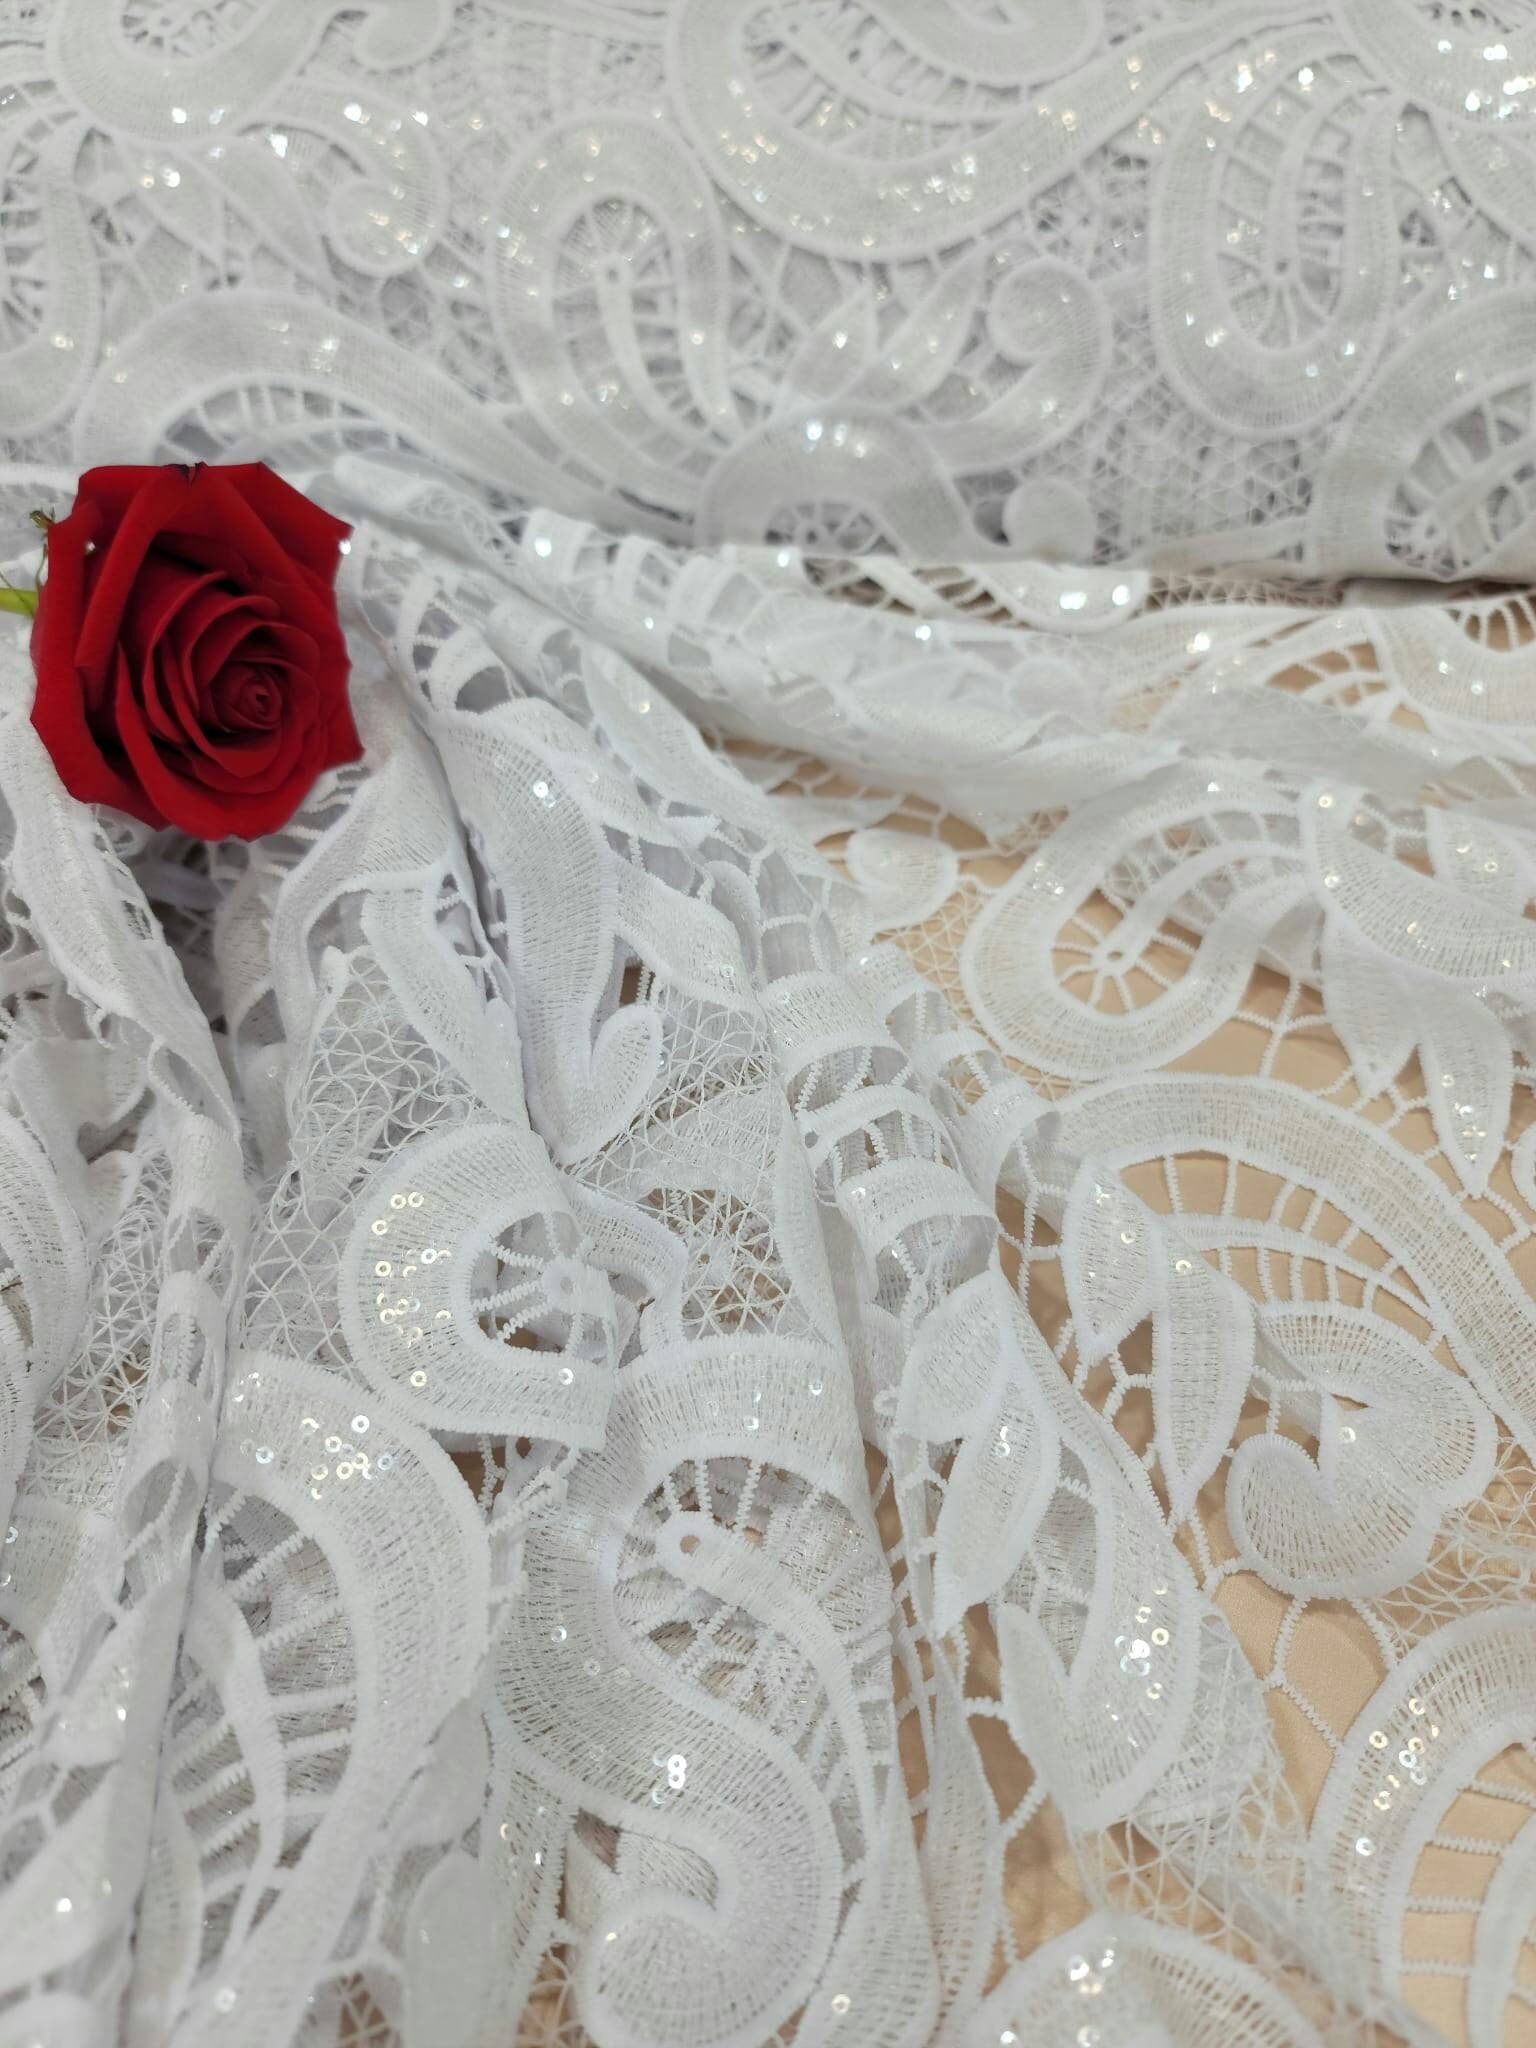 Off-white Lace Fabric - Guipure lace - lace fabric from